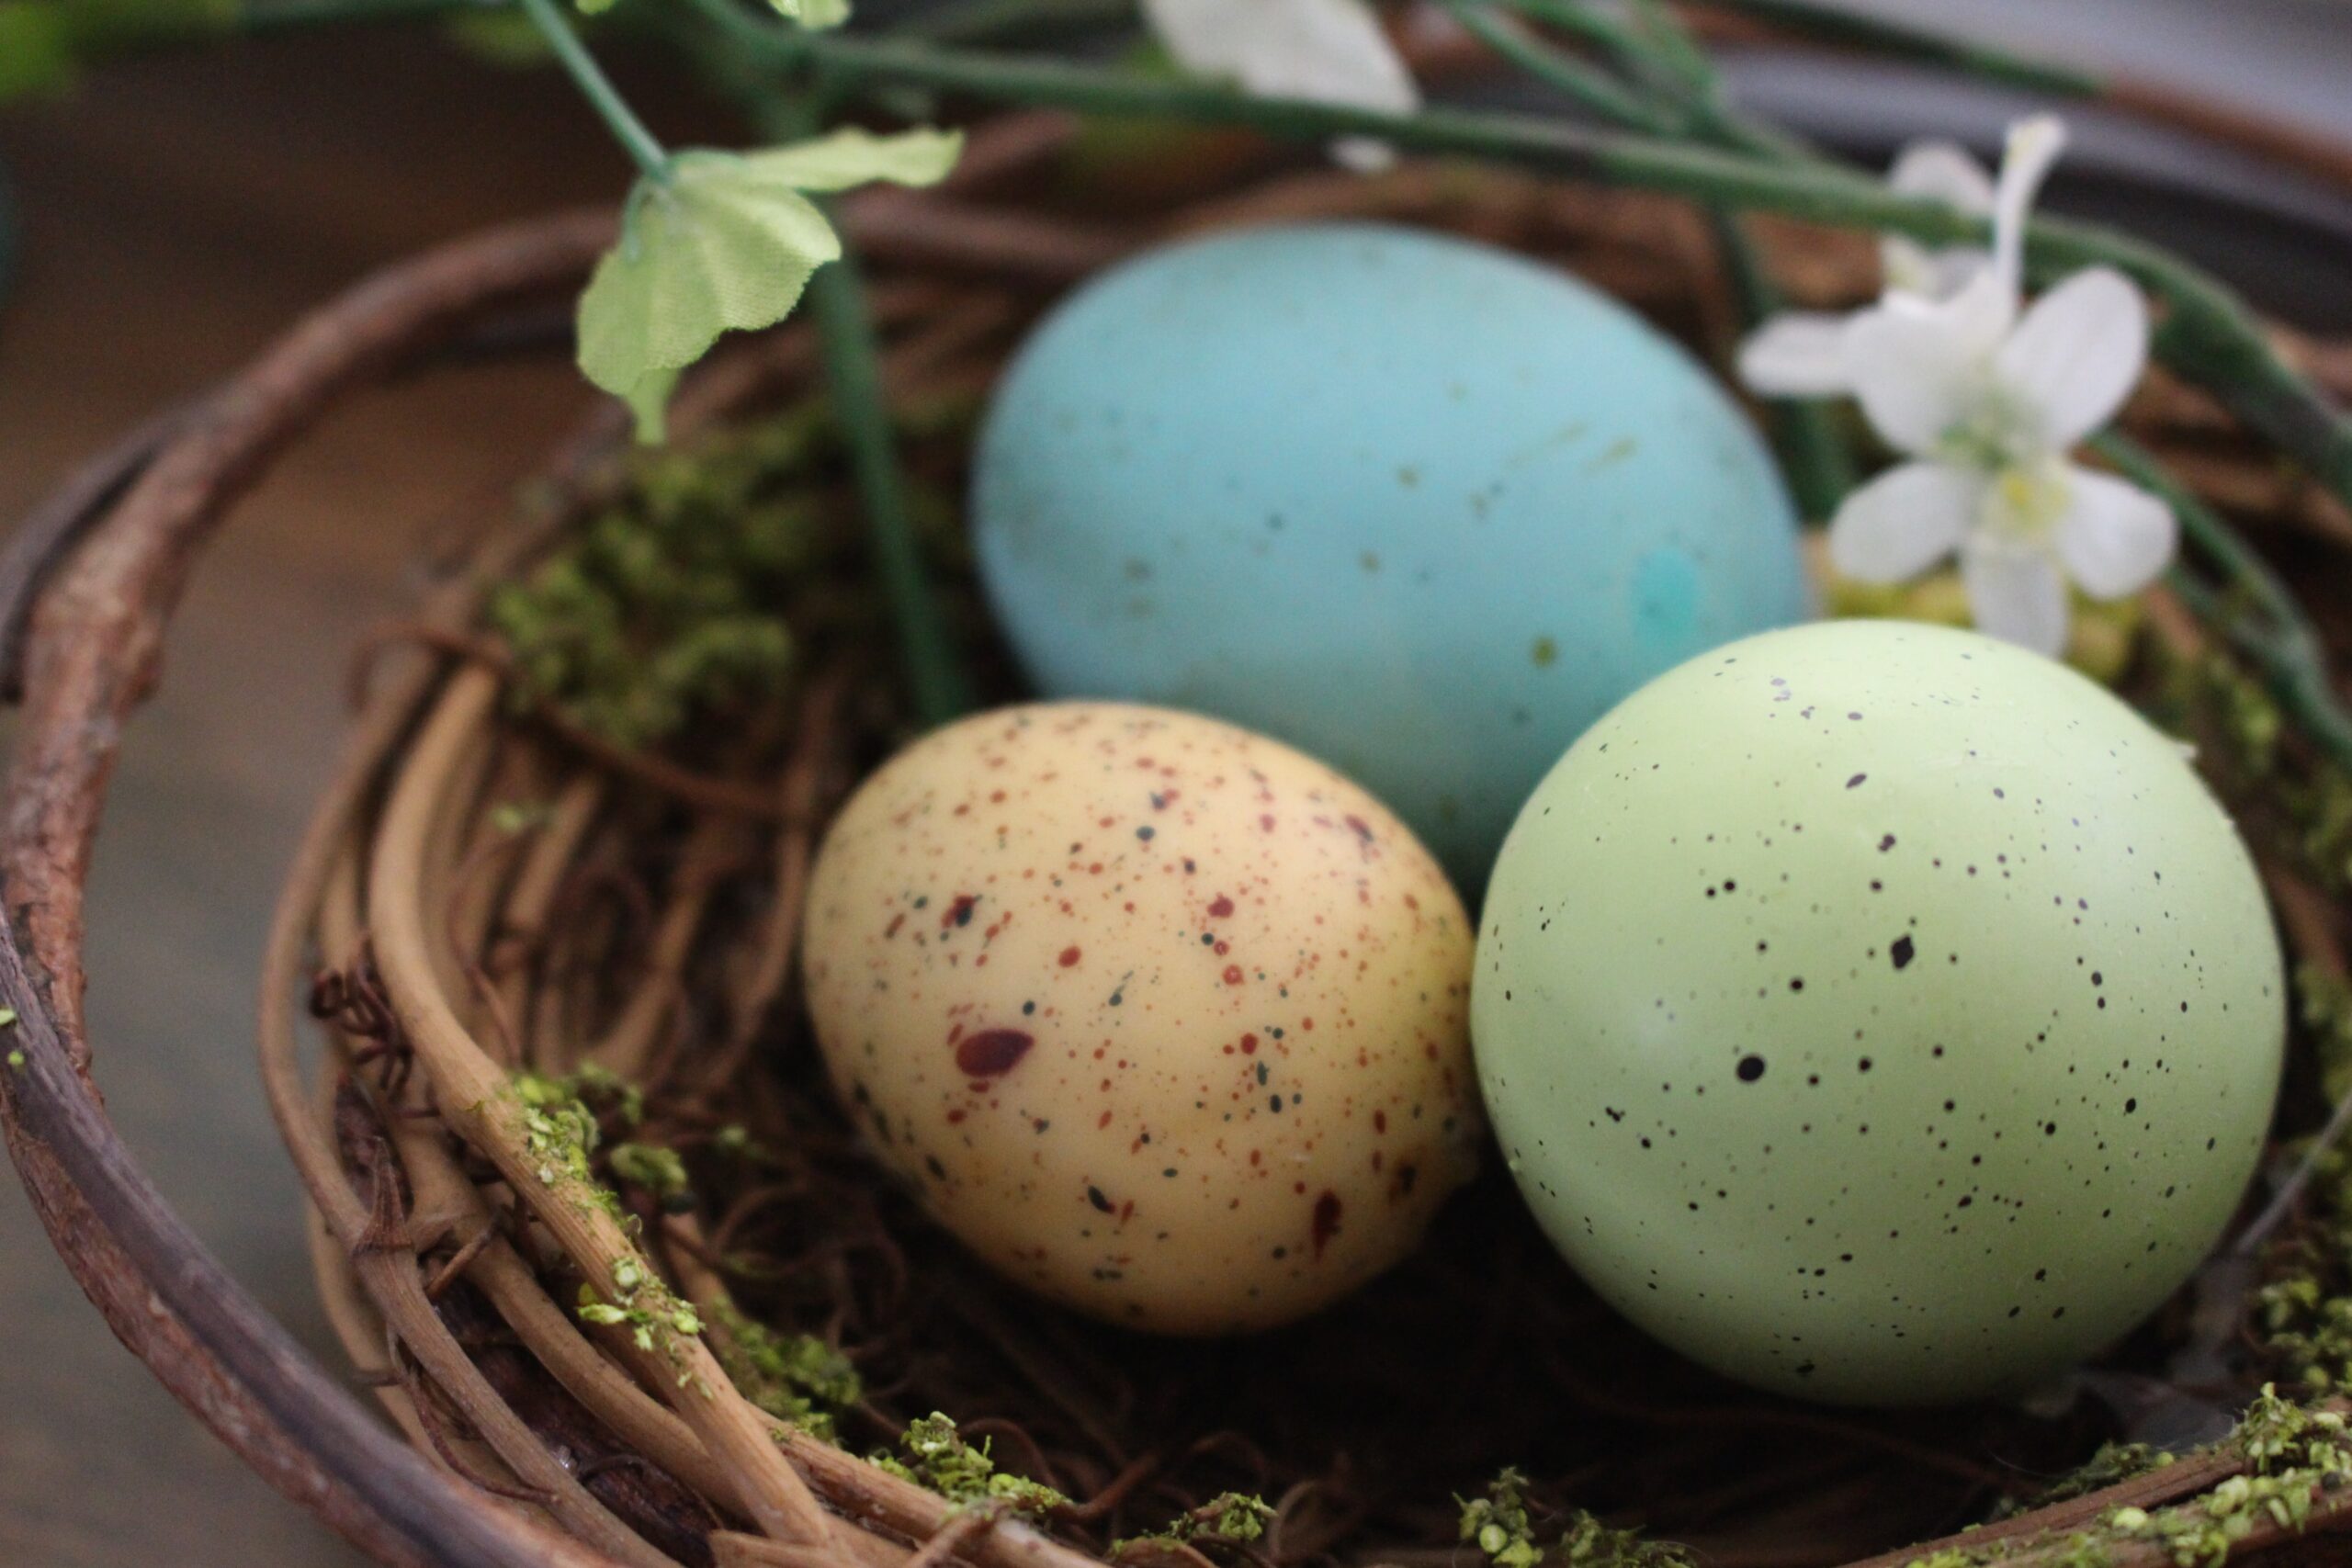 speckled eggs in a basket